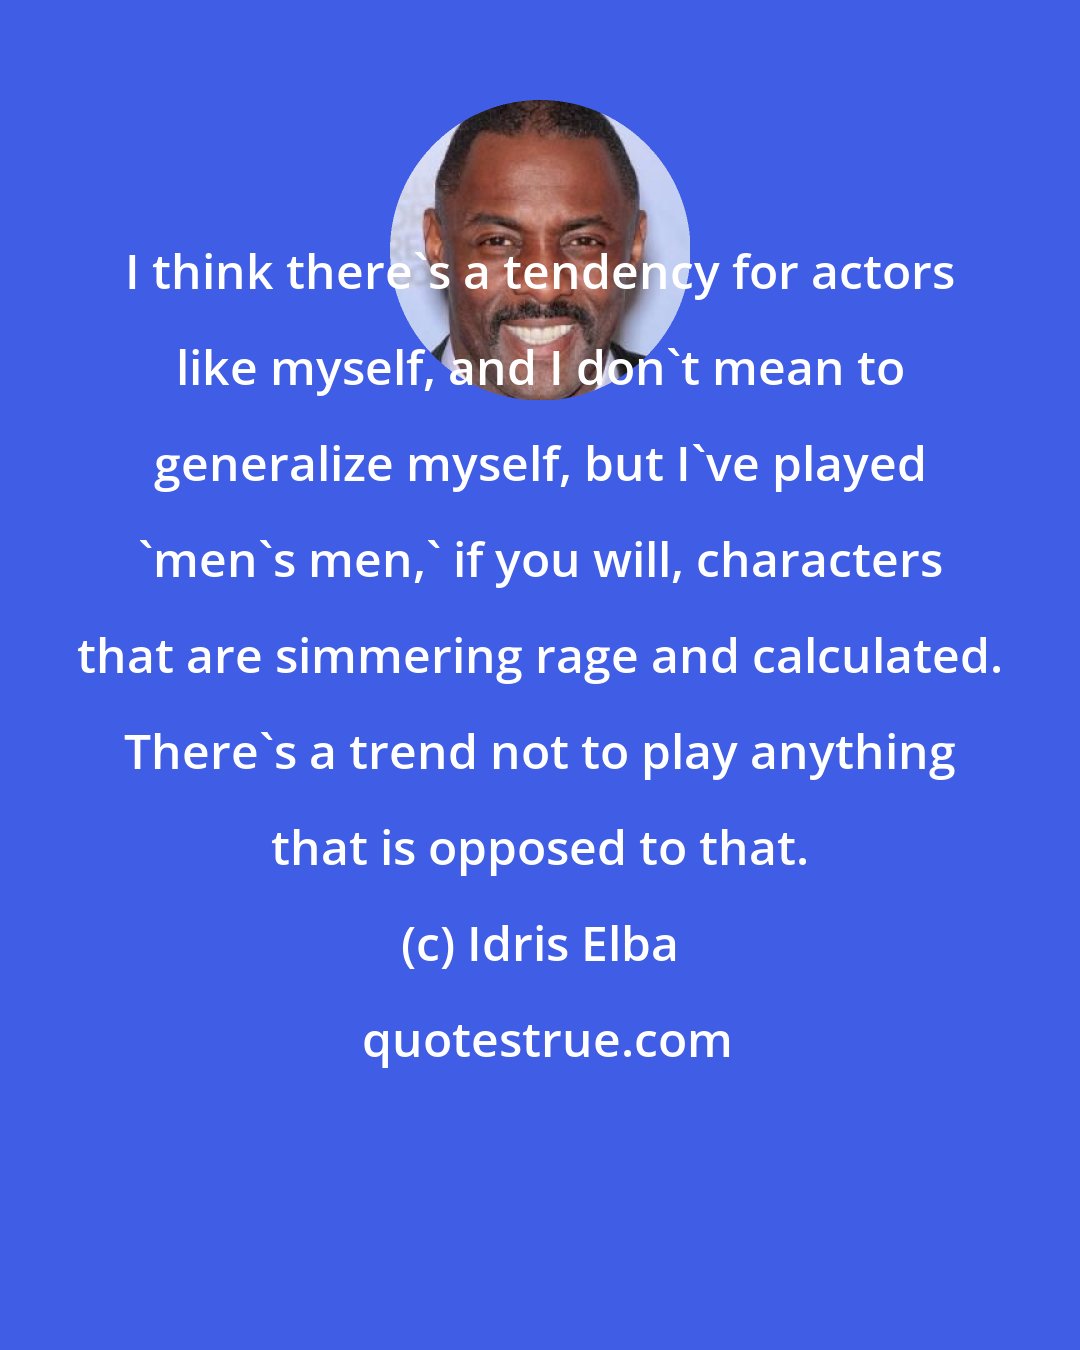 Idris Elba: I think there's a tendency for actors like myself, and I don't mean to generalize myself, but I've played 'men's men,' if you will, characters that are simmering rage and calculated. There's a trend not to play anything that is opposed to that.